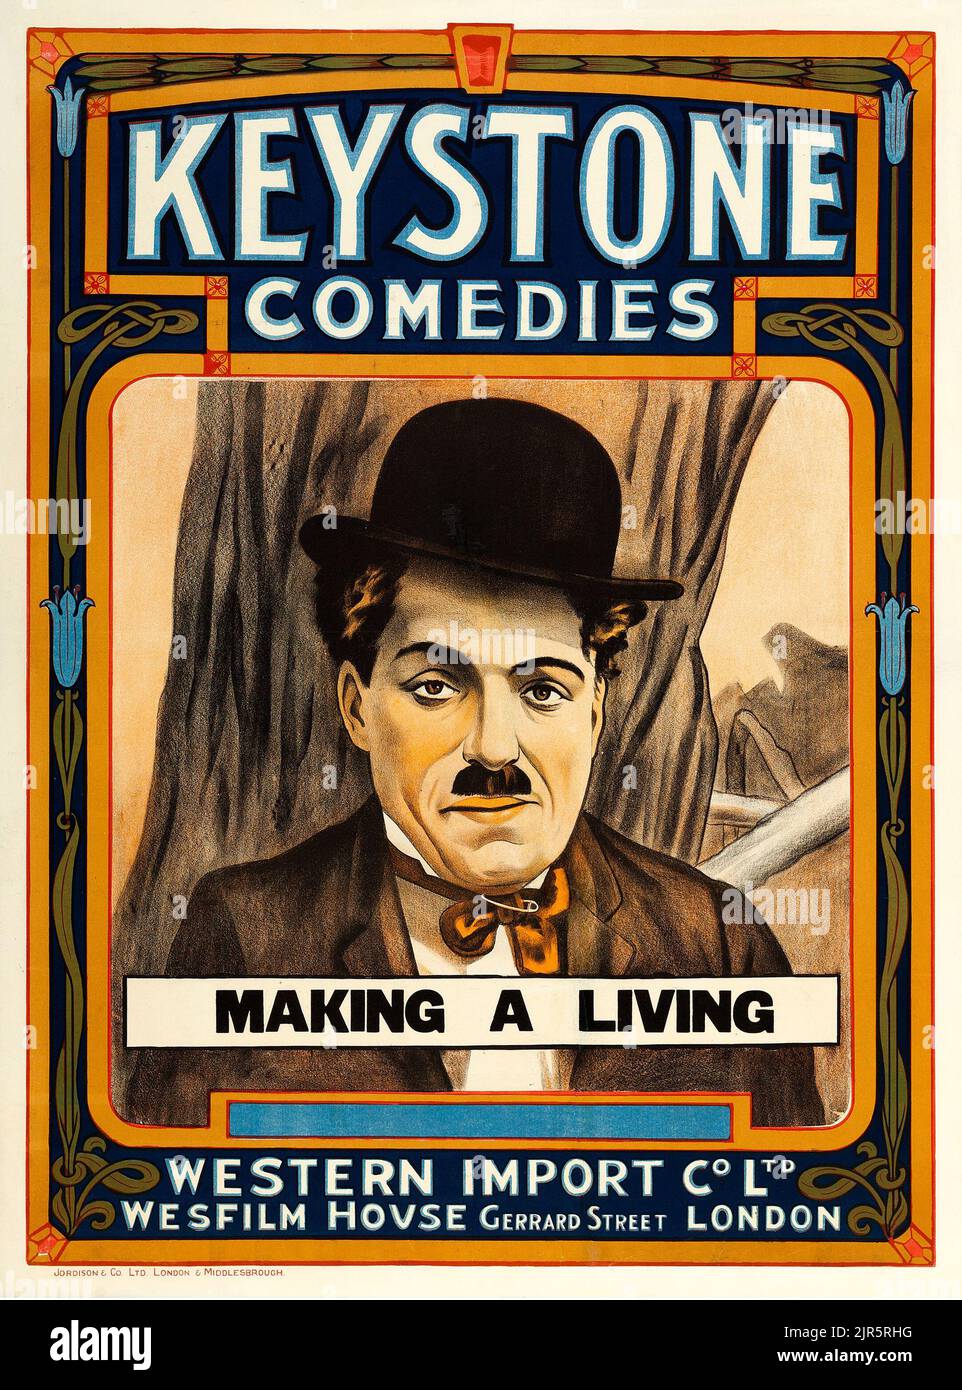 Vintage-Filmplakat (Keystone Comedy - Western Import, Wesfilm House, 1915). Stock British - Making a Living (auch bekannt als Doing His Best, A Busted Johnny, Troubles und Take My Picture) ist der erste Film mit Charlie Chaplin. Stockfoto